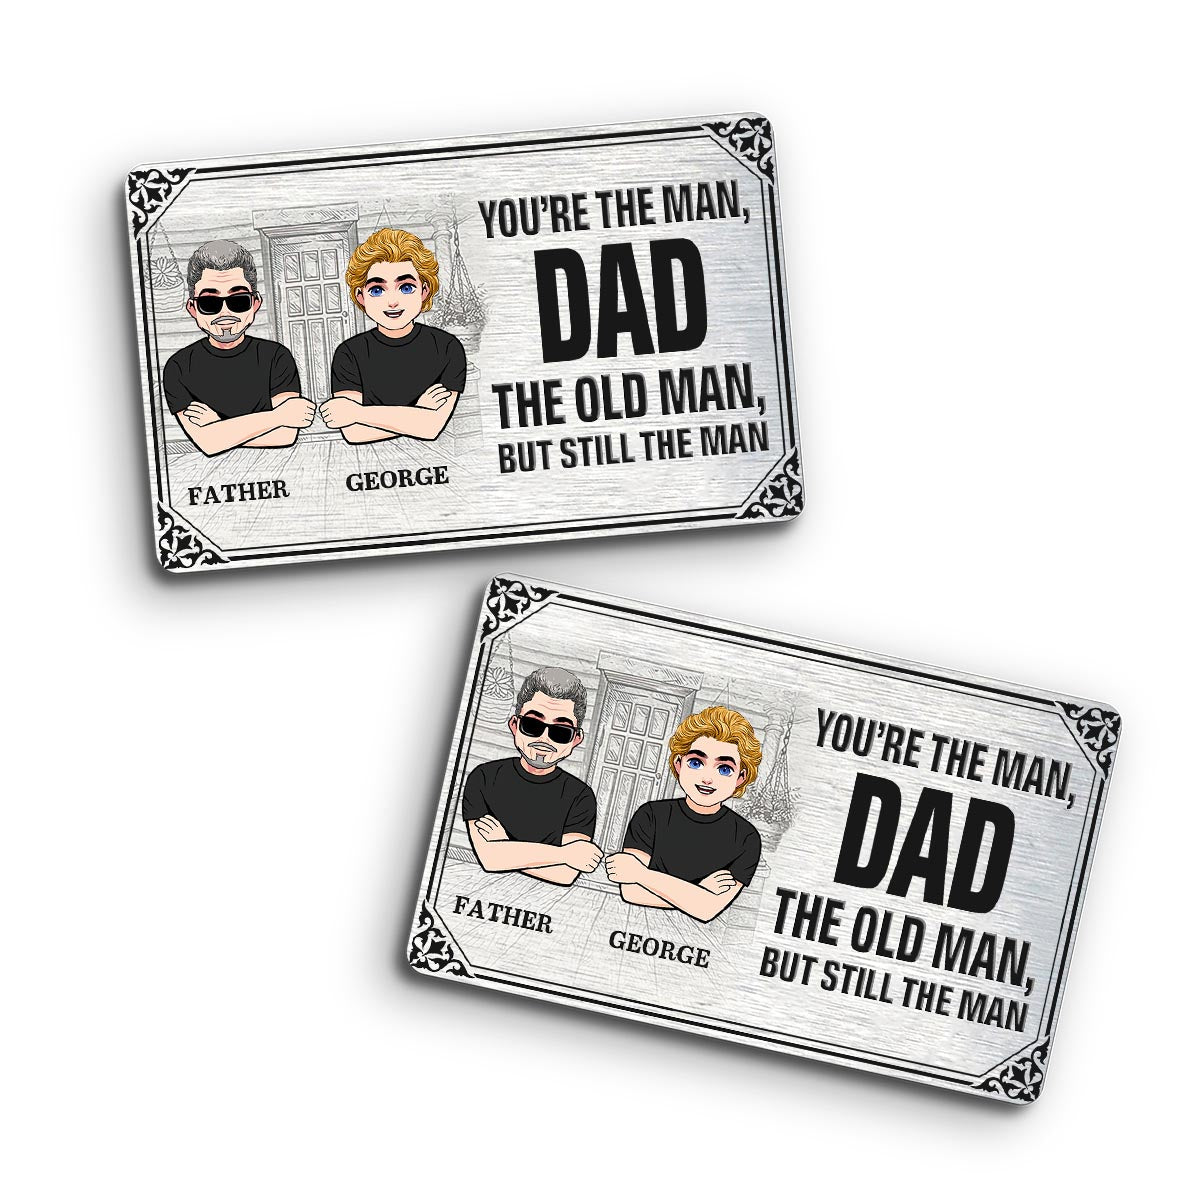 You're The Man - Gift for dad, grandpa, uncle, husband - Personalized Wallet Insert Card